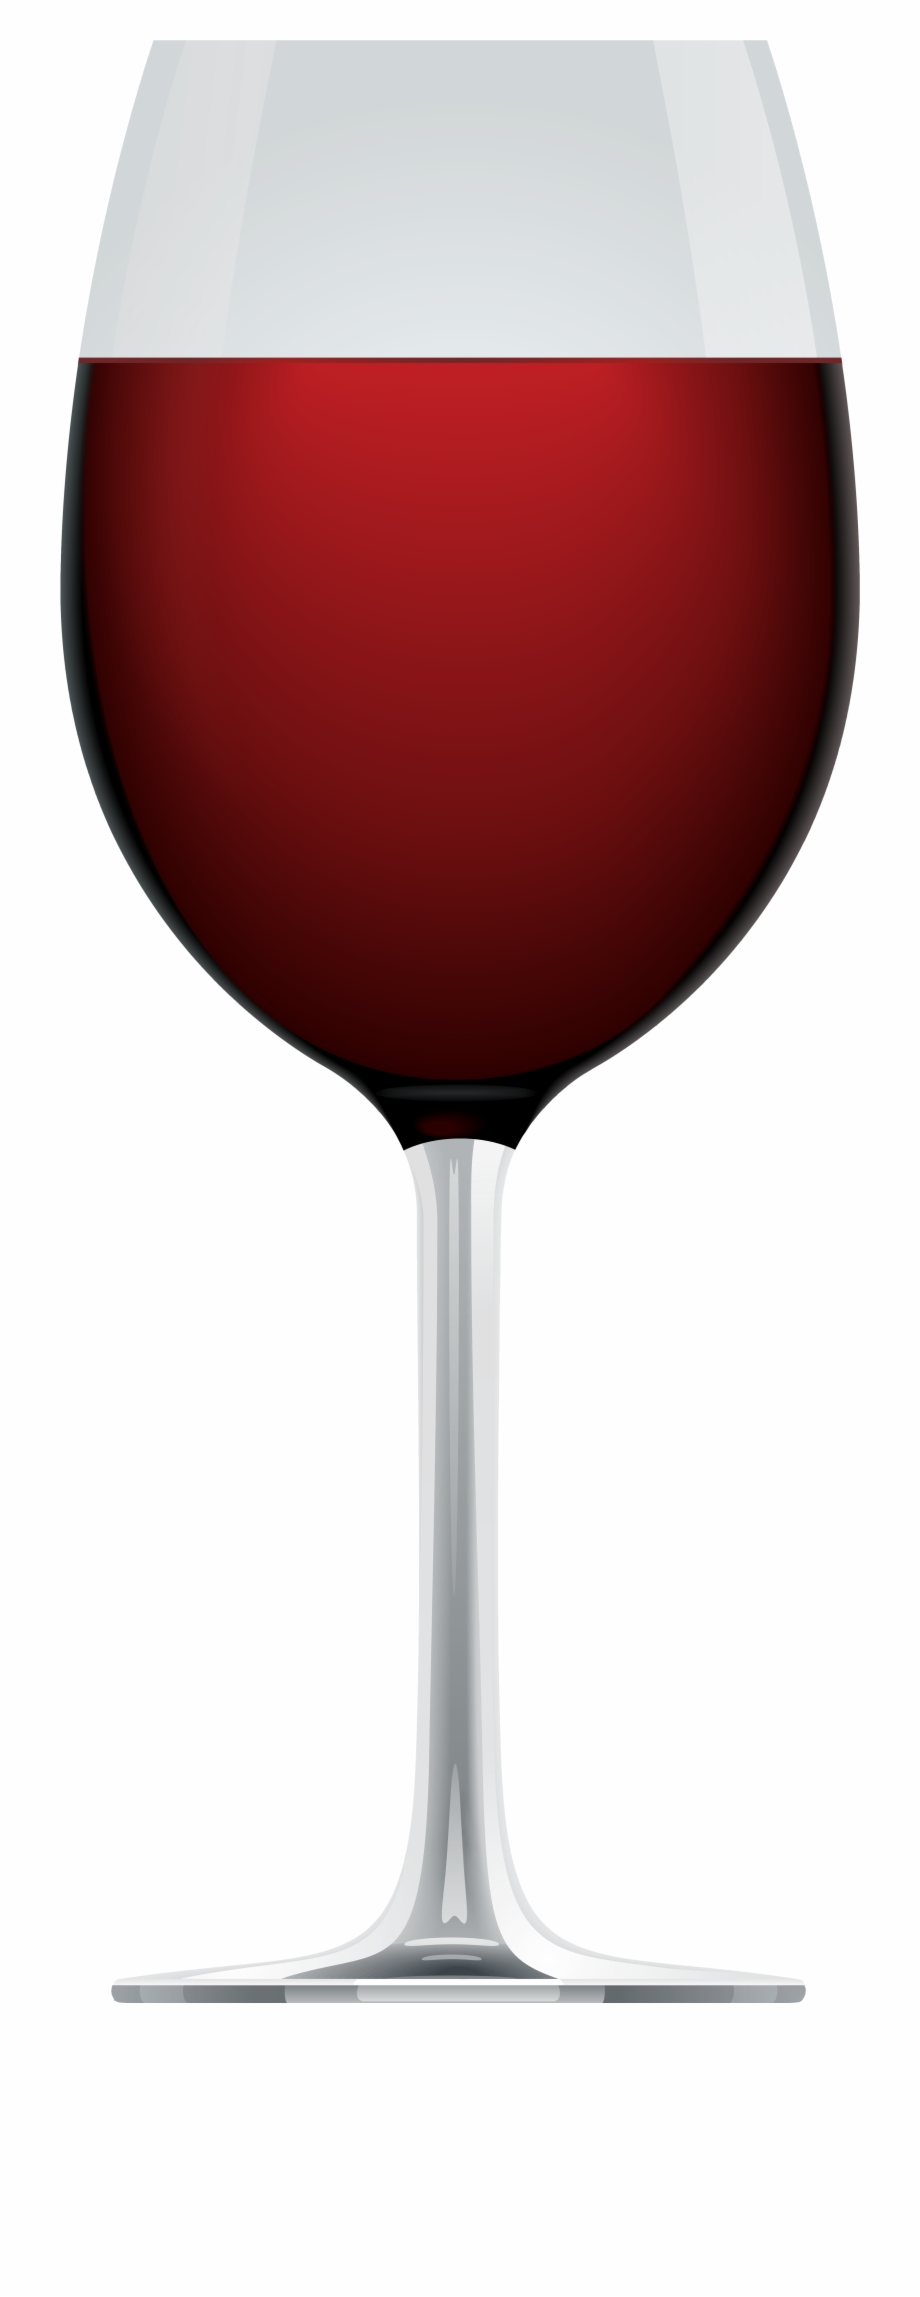 Free Wine Glass Png Transparent, Download Free Wine Glass Png